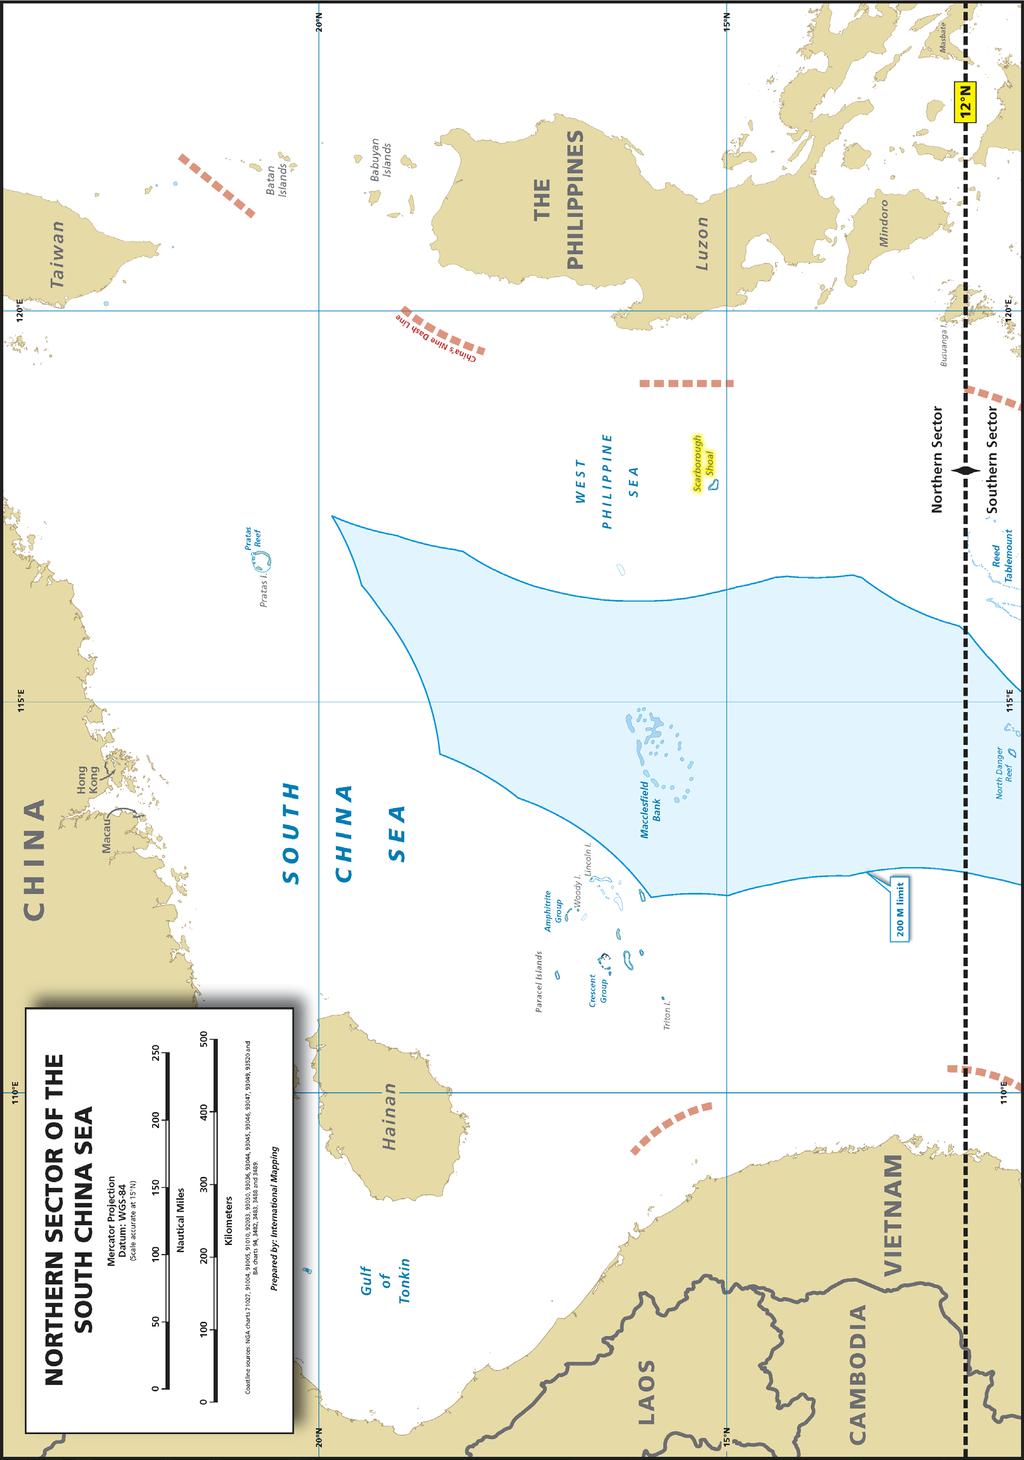 Figure 3: Northern Sector of the South China Sea